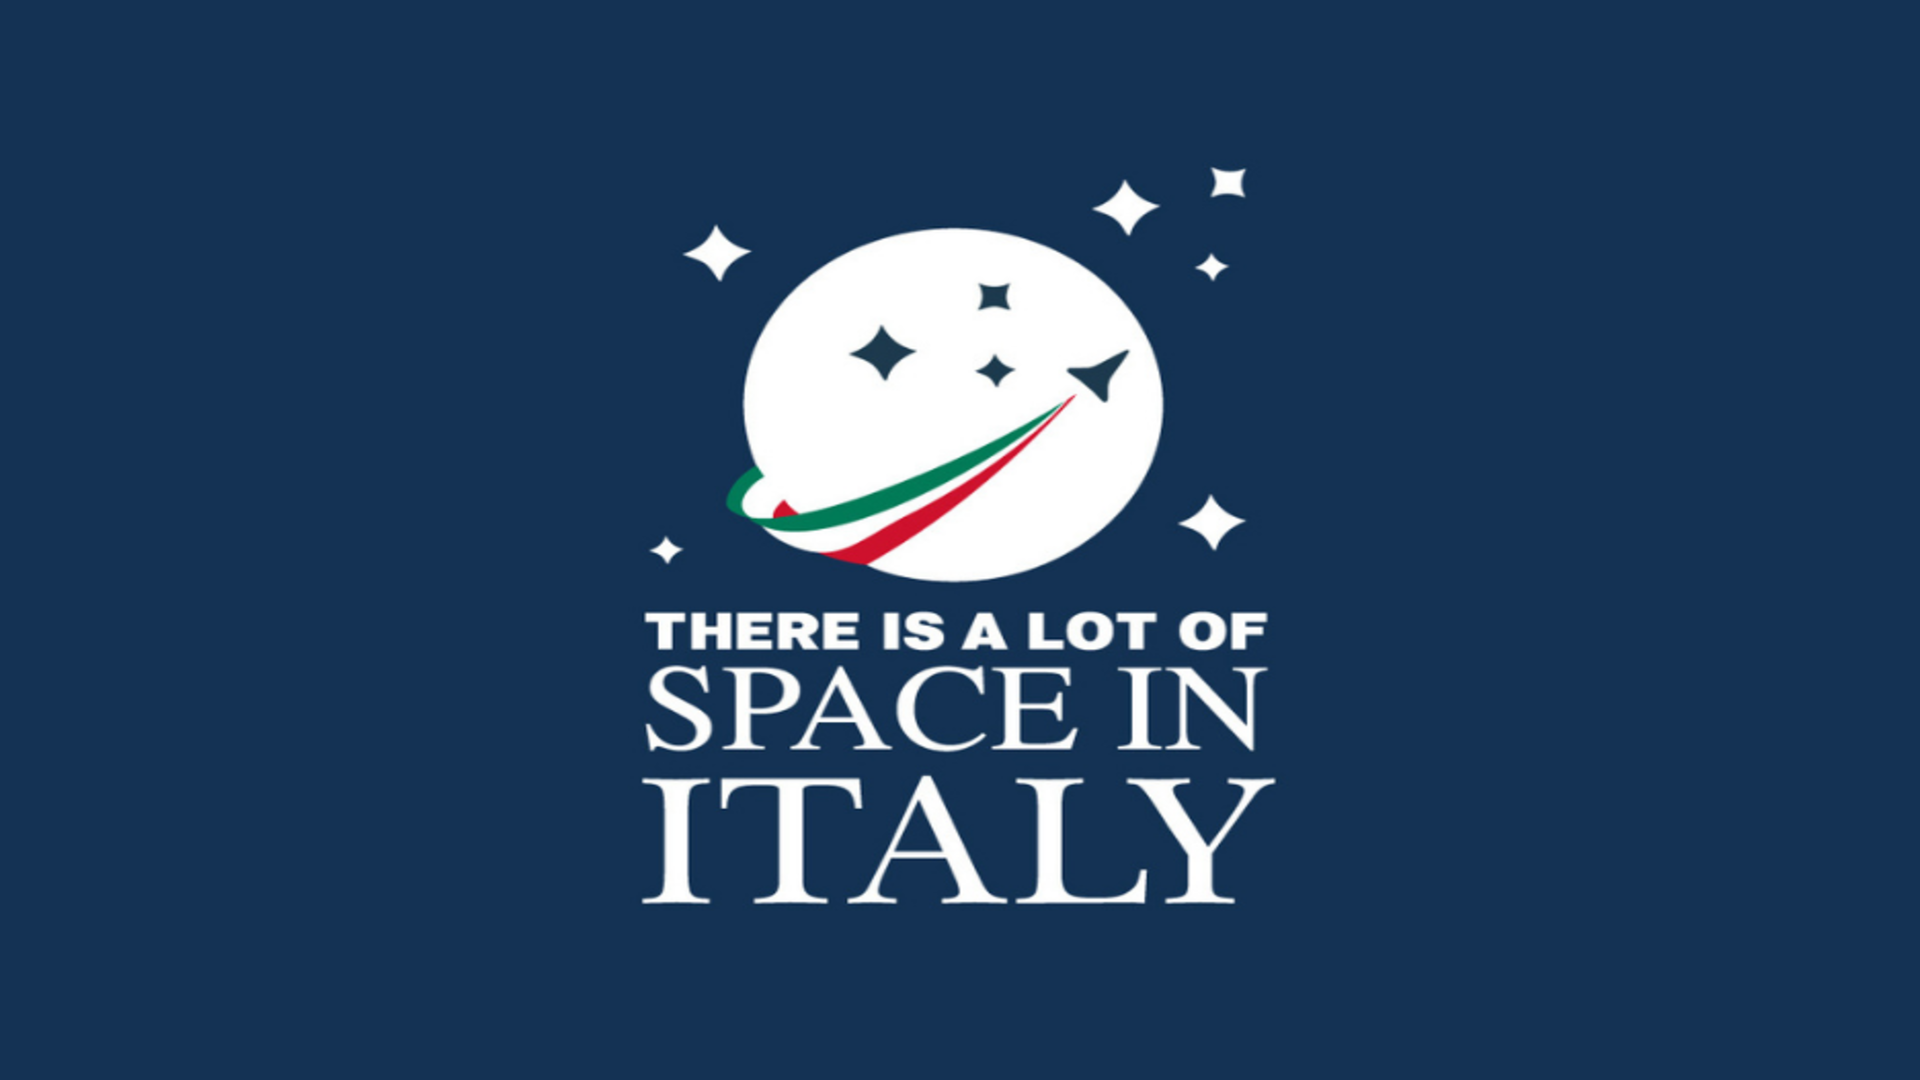 ASI - There is a lot of Space in Italy